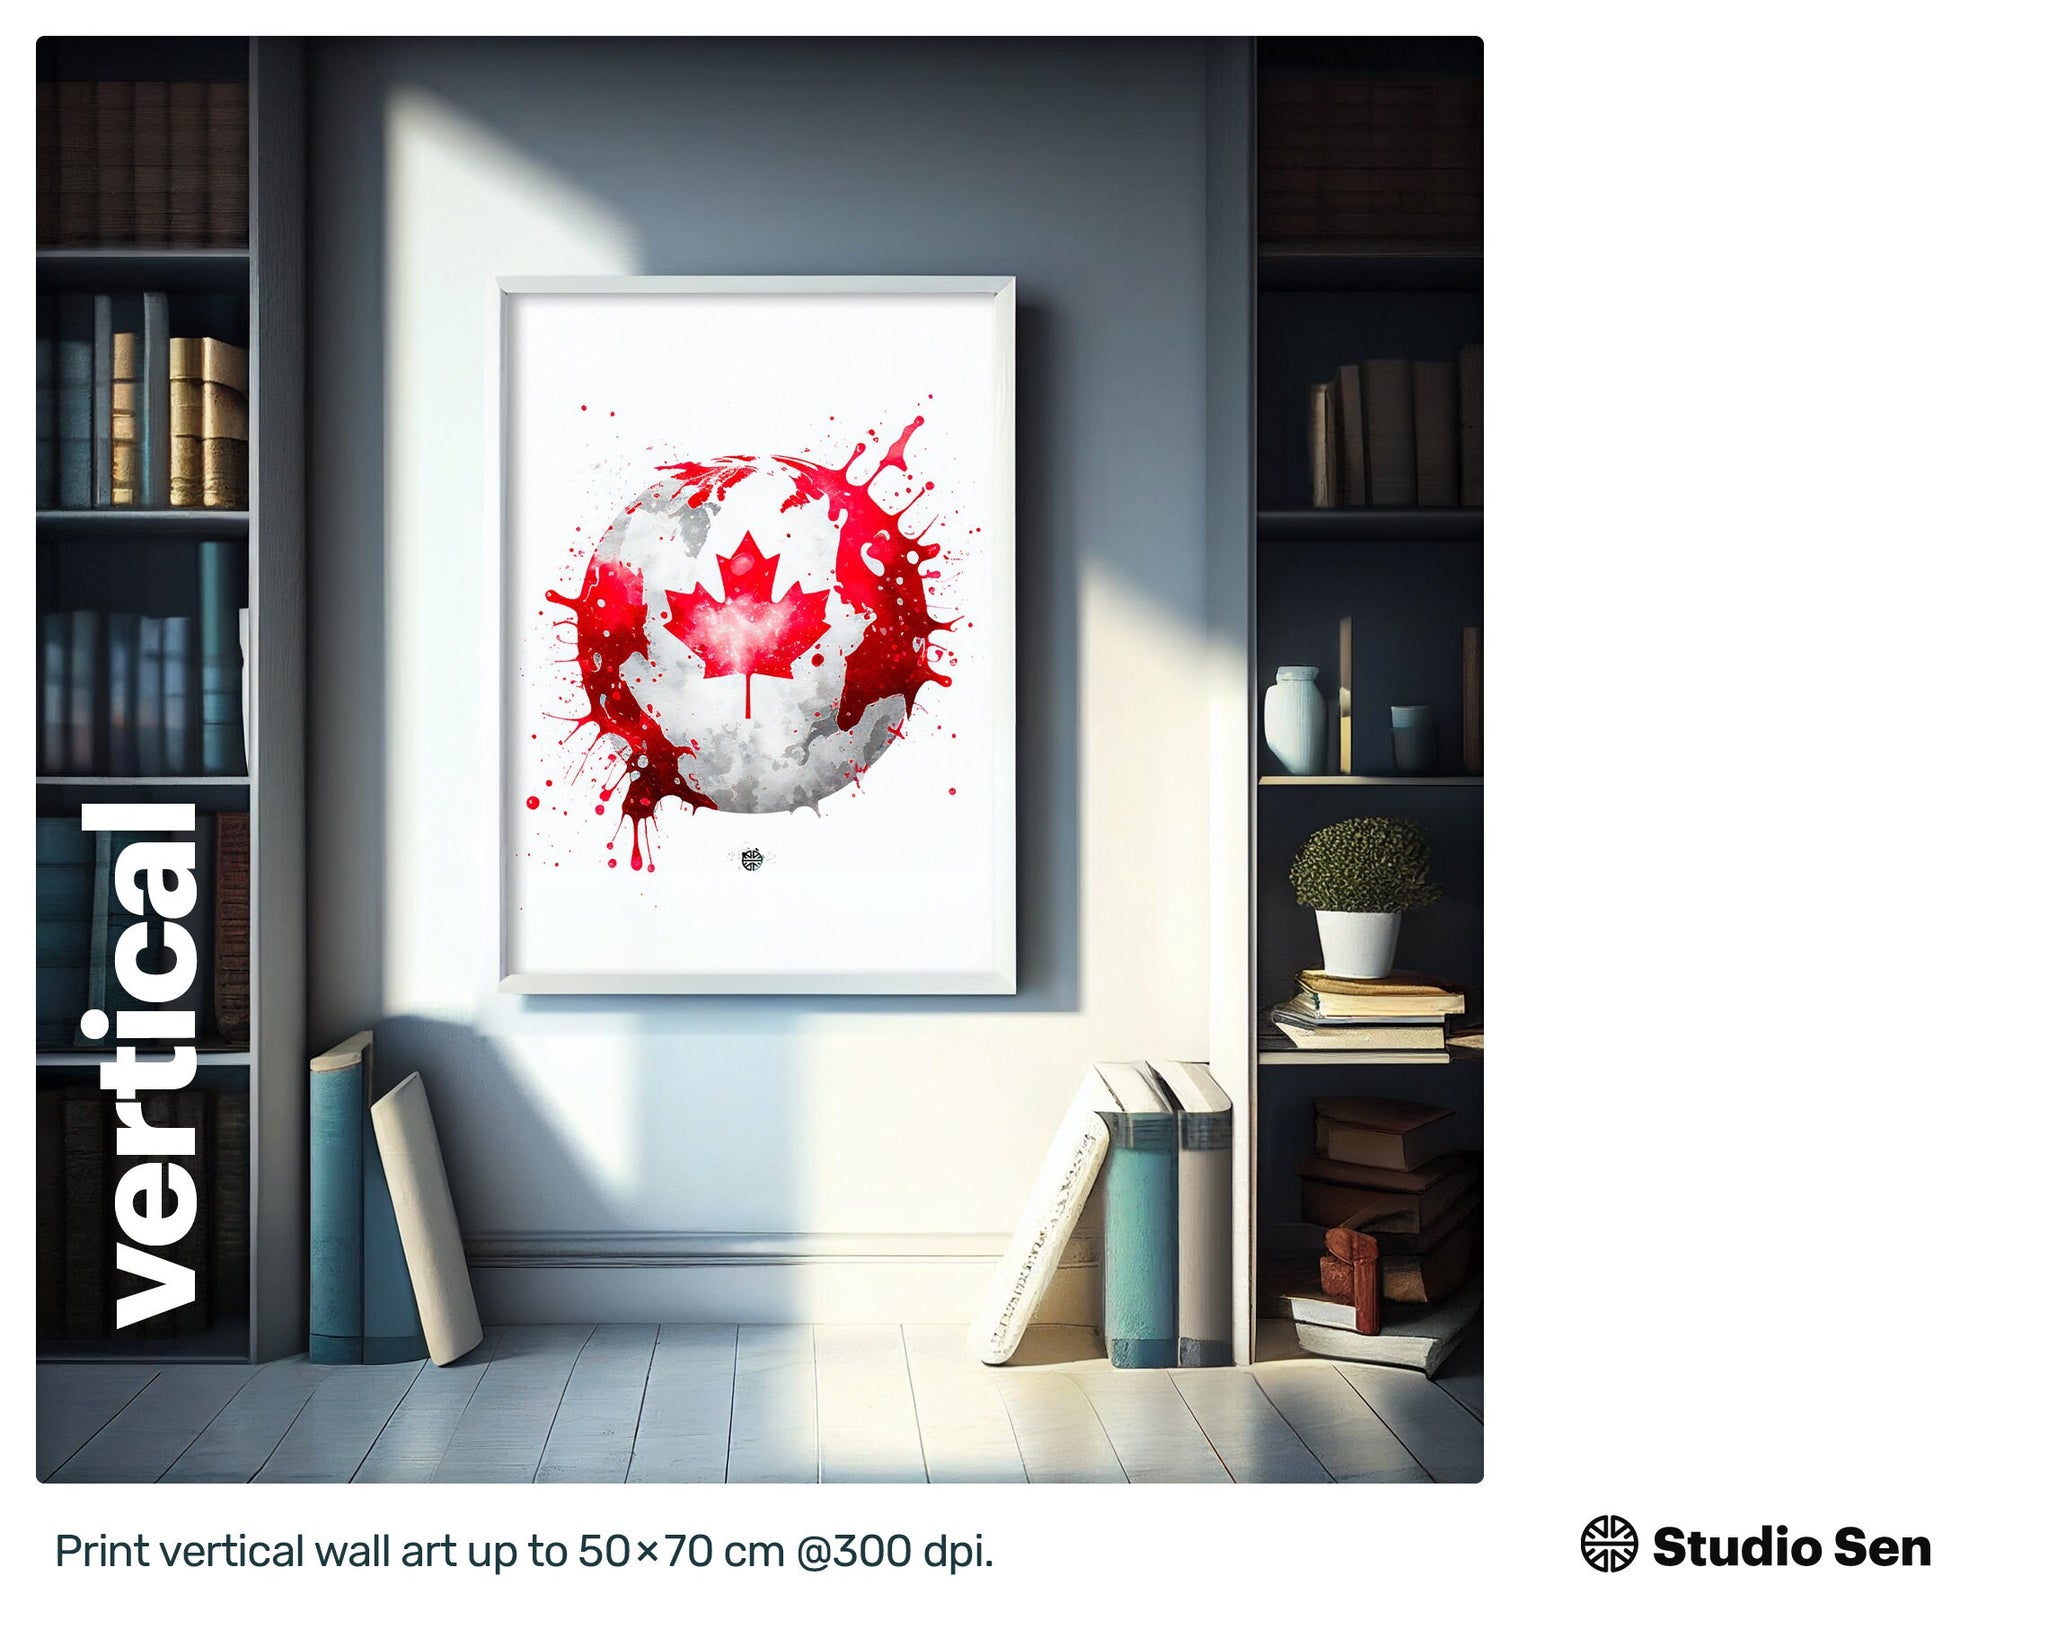 Caring Hilarious Canadian flag, Cozy Cozy Wall Art, Xclusive Oozing with charm Youthful Fun Upbeat Painting